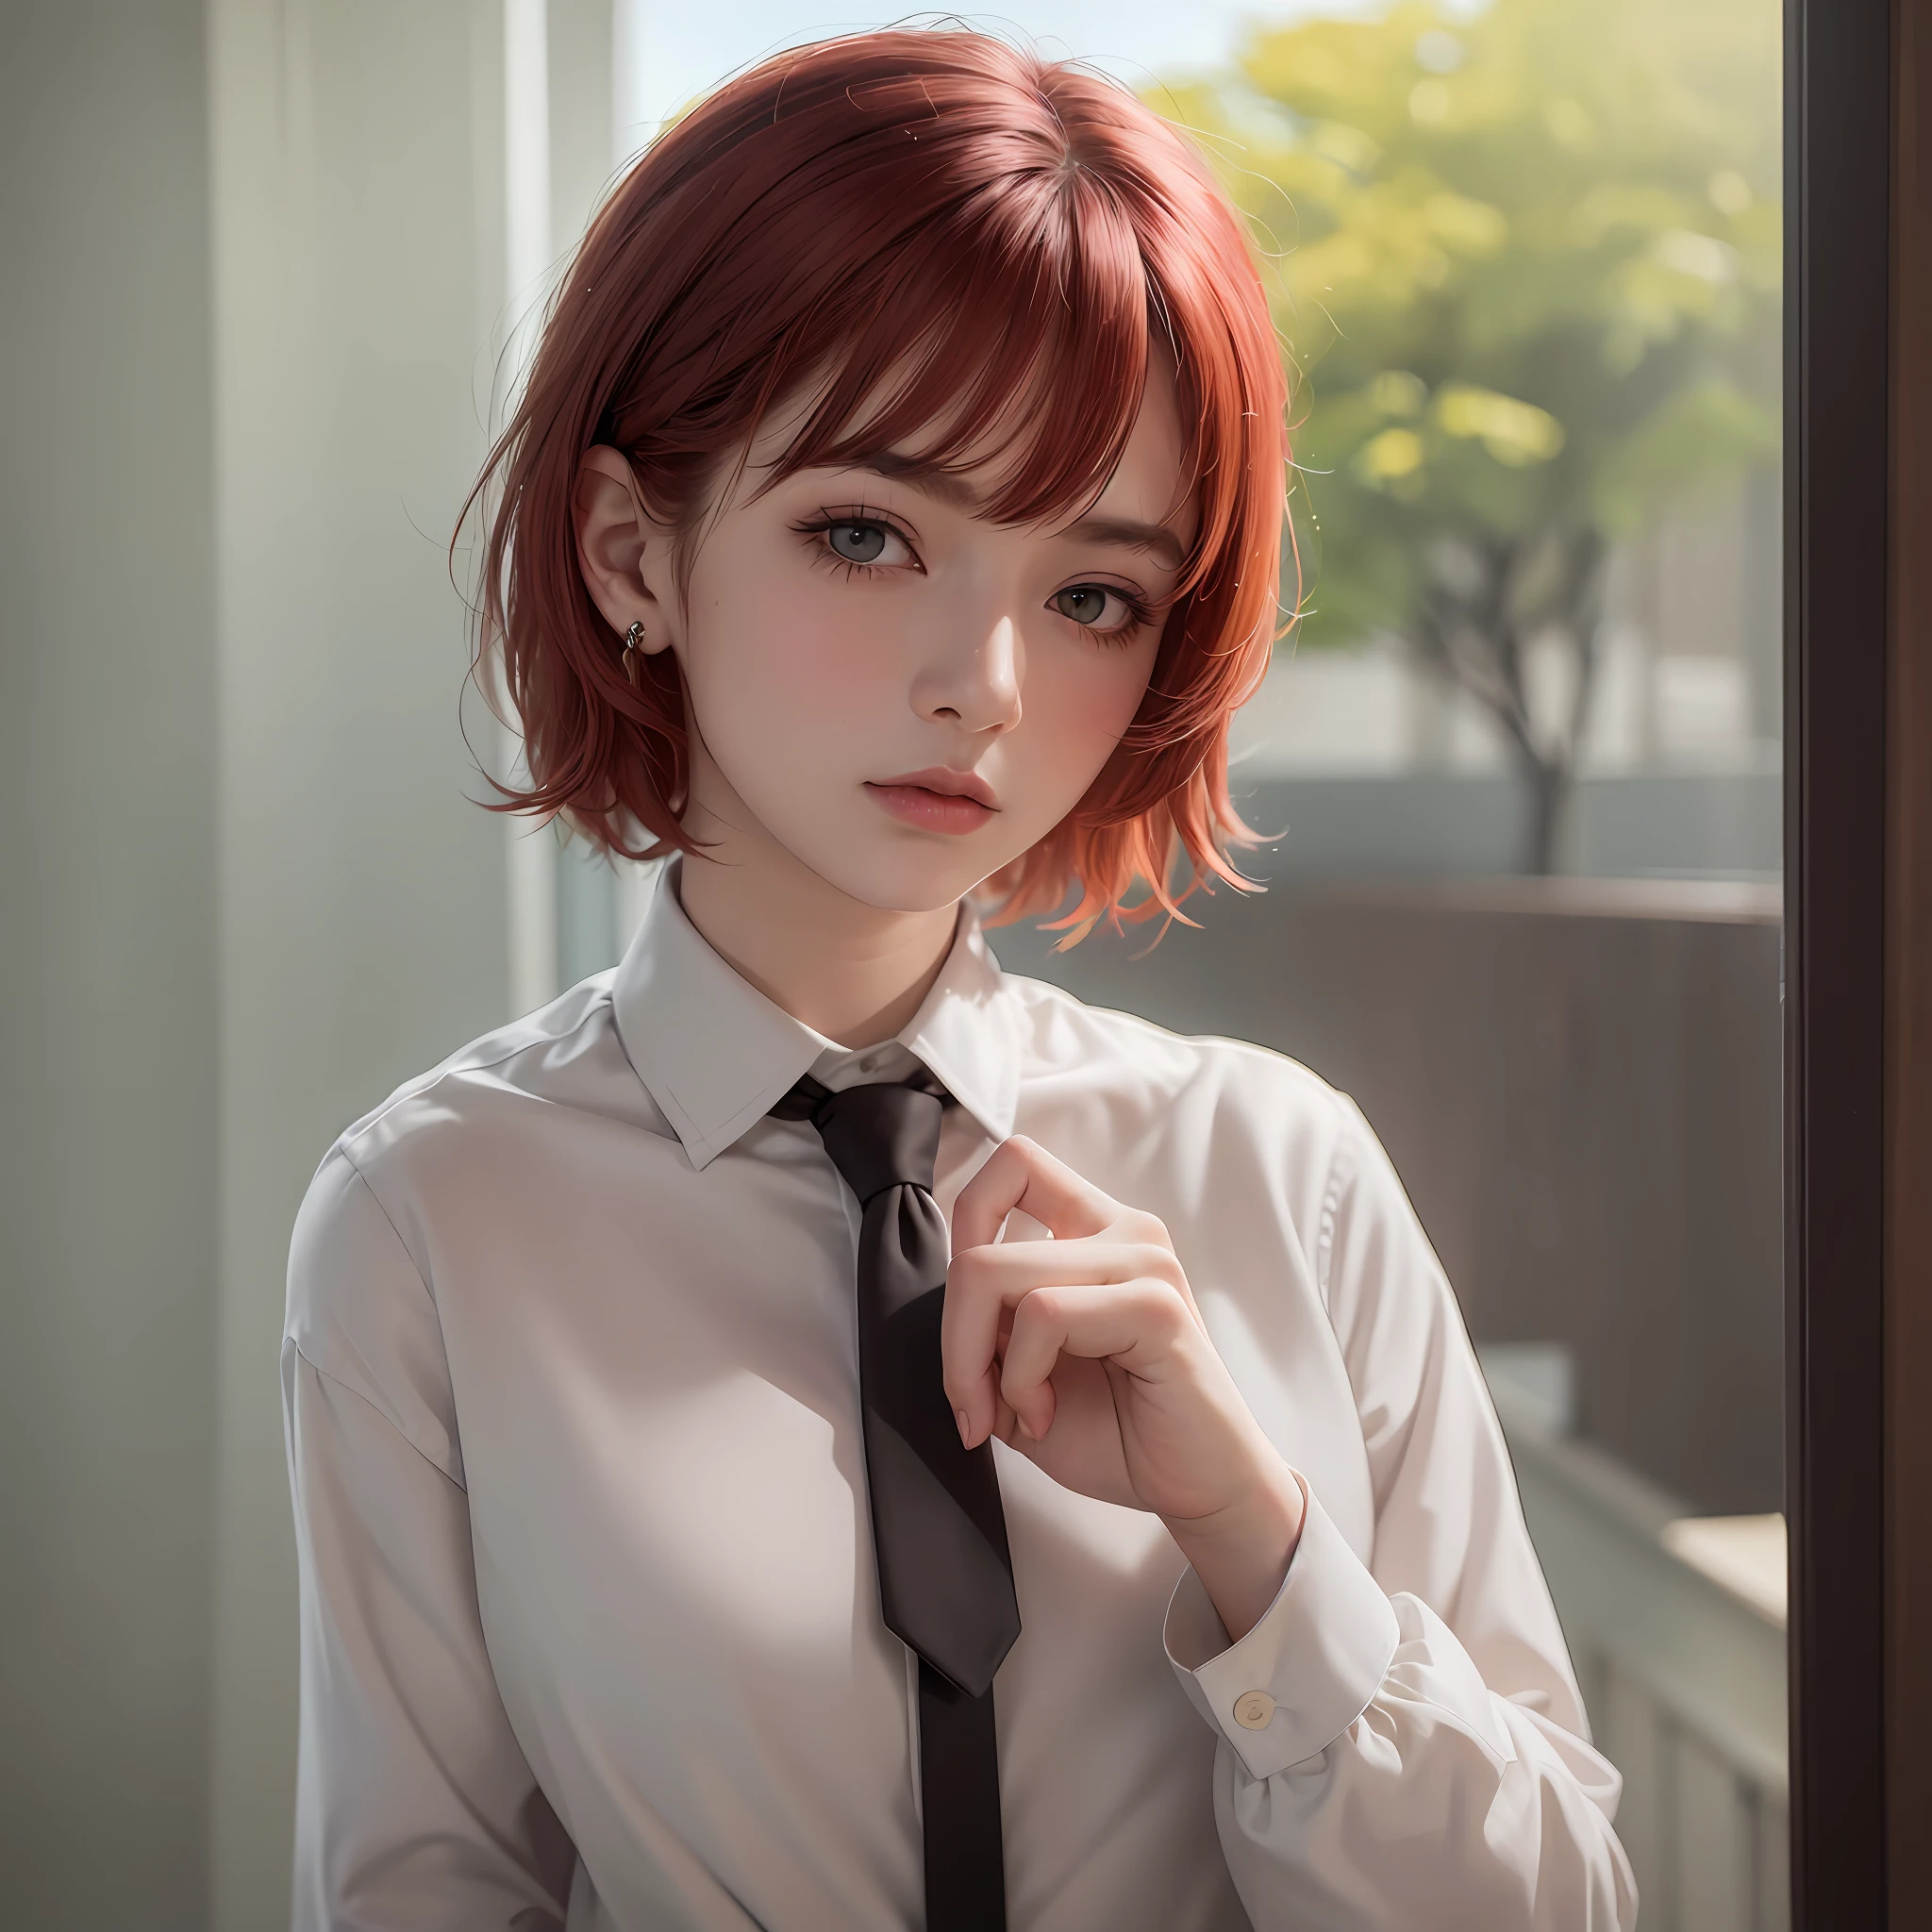 Best image quality, masterpiece, highest quality, full body, sneakers, bags, ribbons, piercings, long hair, super resolution, 18 years old, golden ratio, , detailed shiny skin, (realistic, photorealistic: 1.4), cute girl, standing, looking out the window, white shirt, collared shirt, black tie, black pants, long sleeves, slight smile (nose blush), yellow eyes + rings, short hair + red hair +Long braided hair